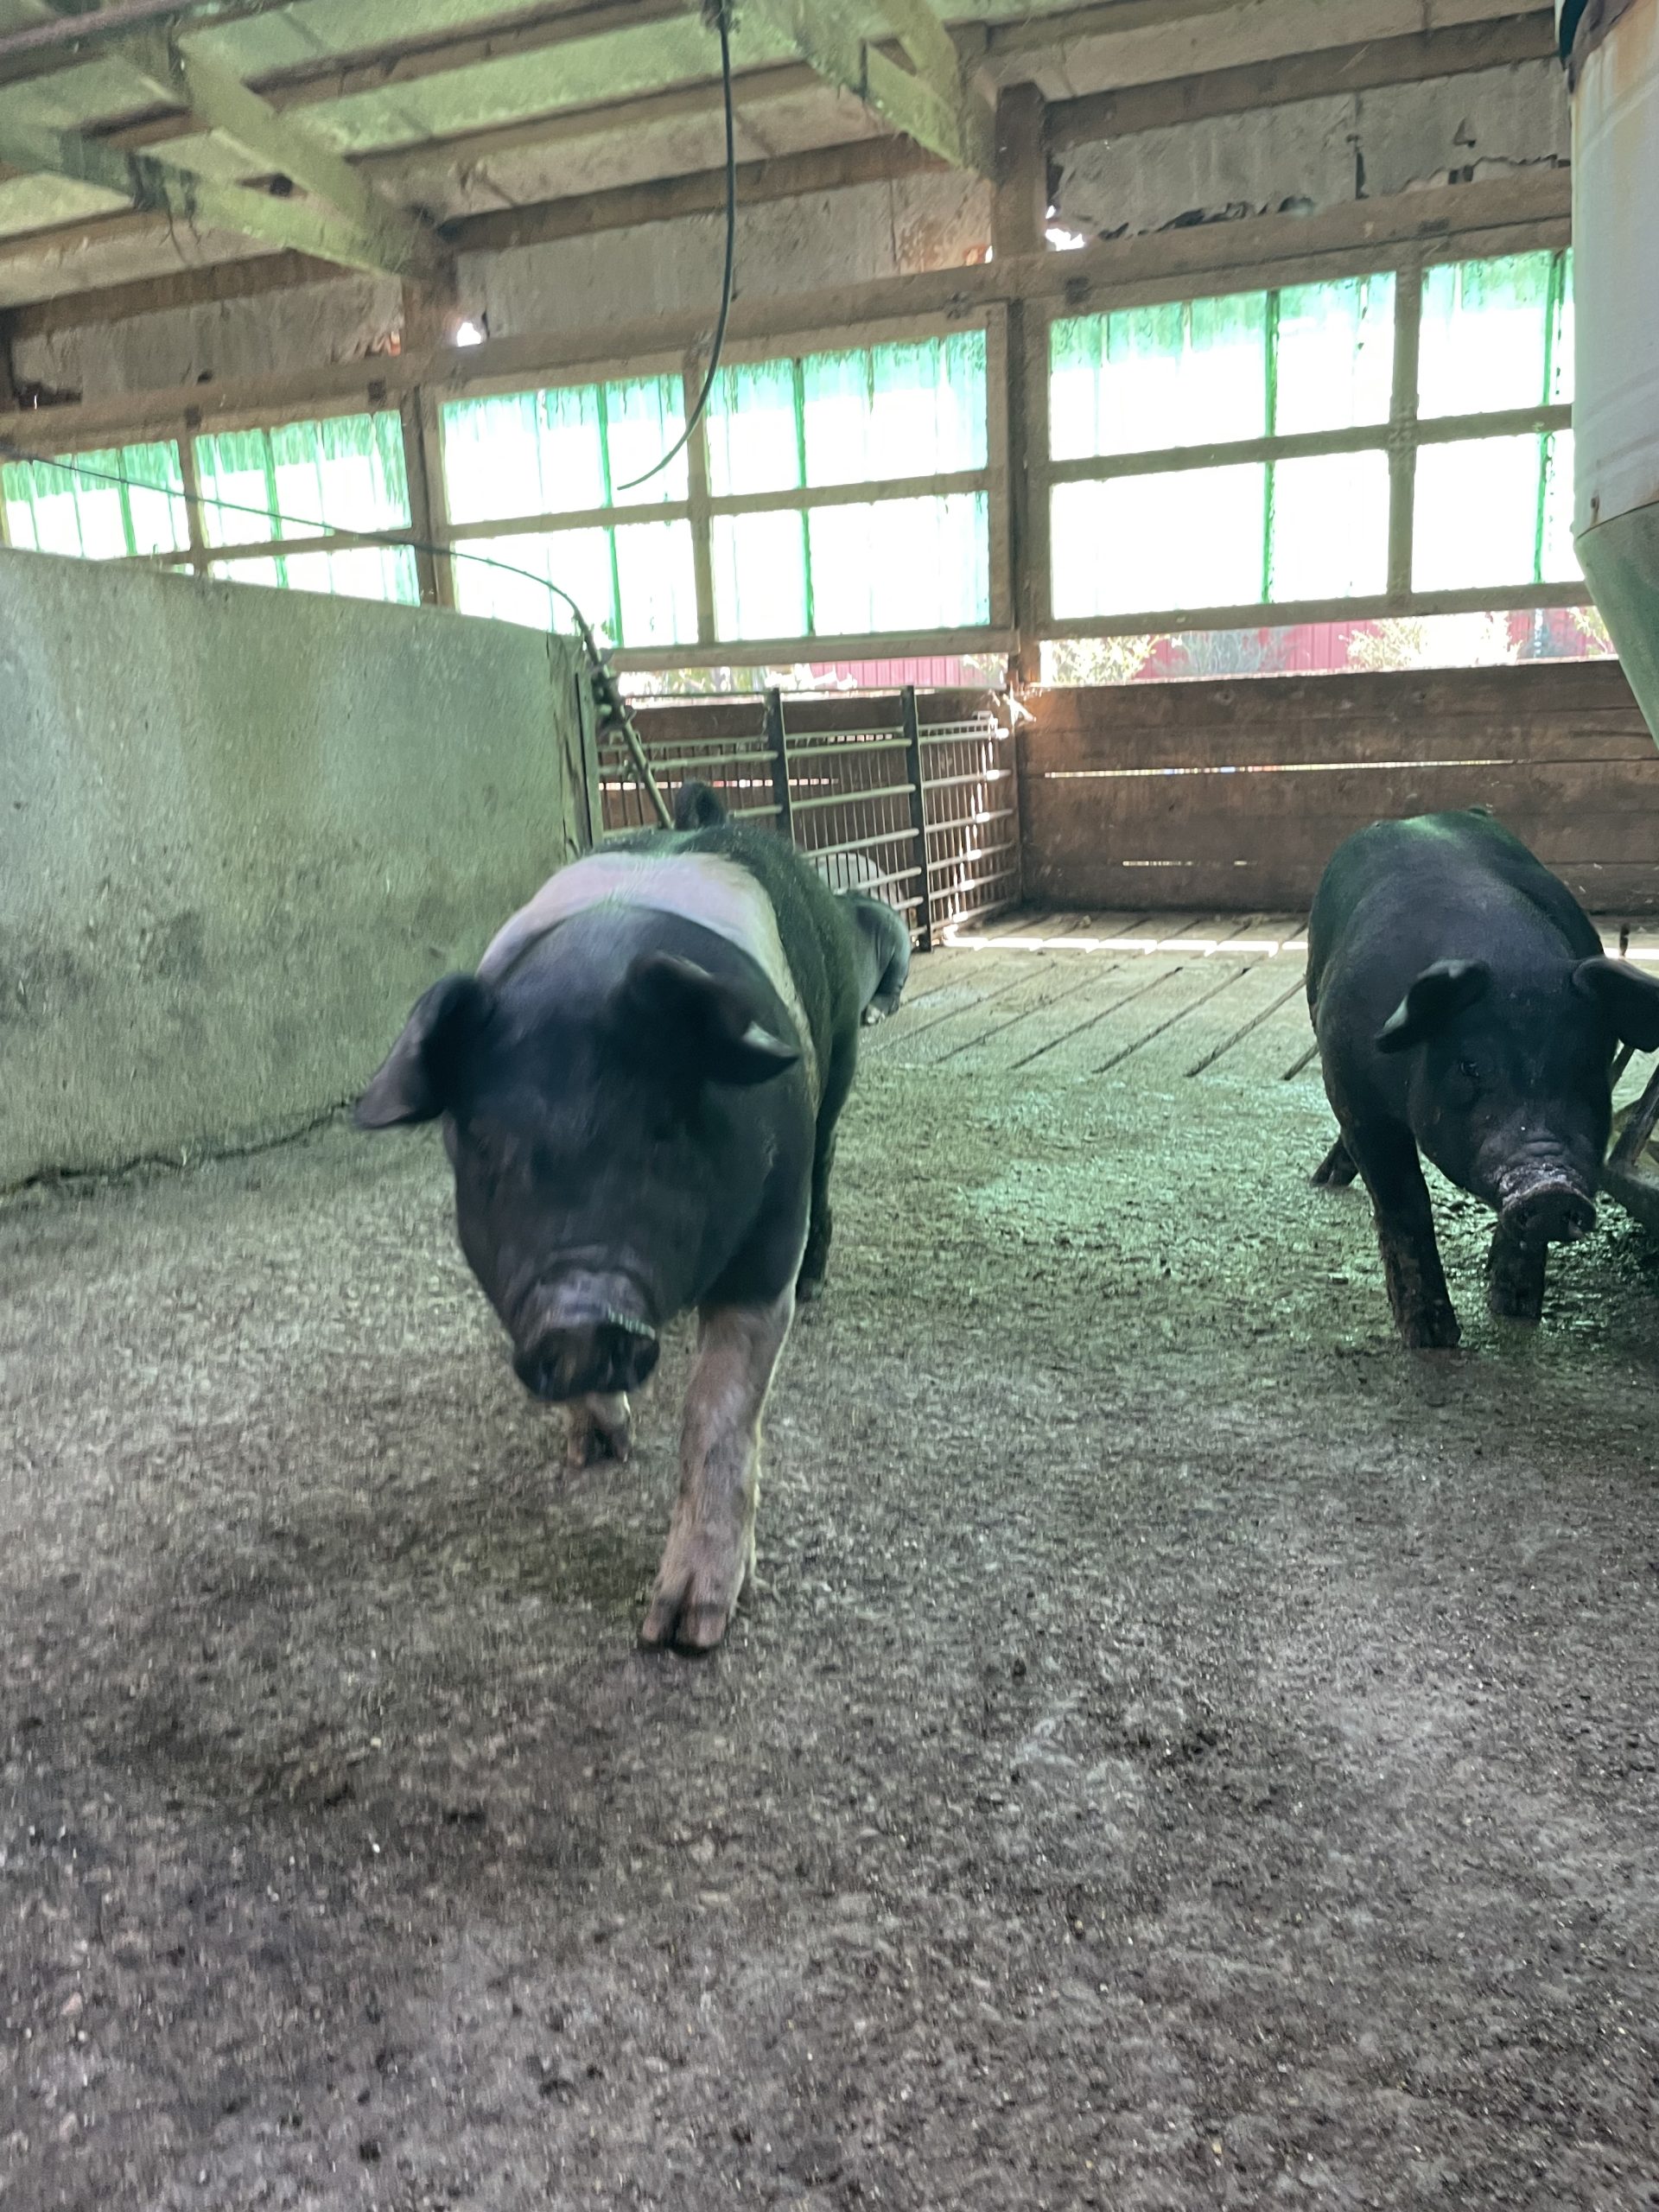 Two pigs walking. (Photo by Natalie Sleichter.)